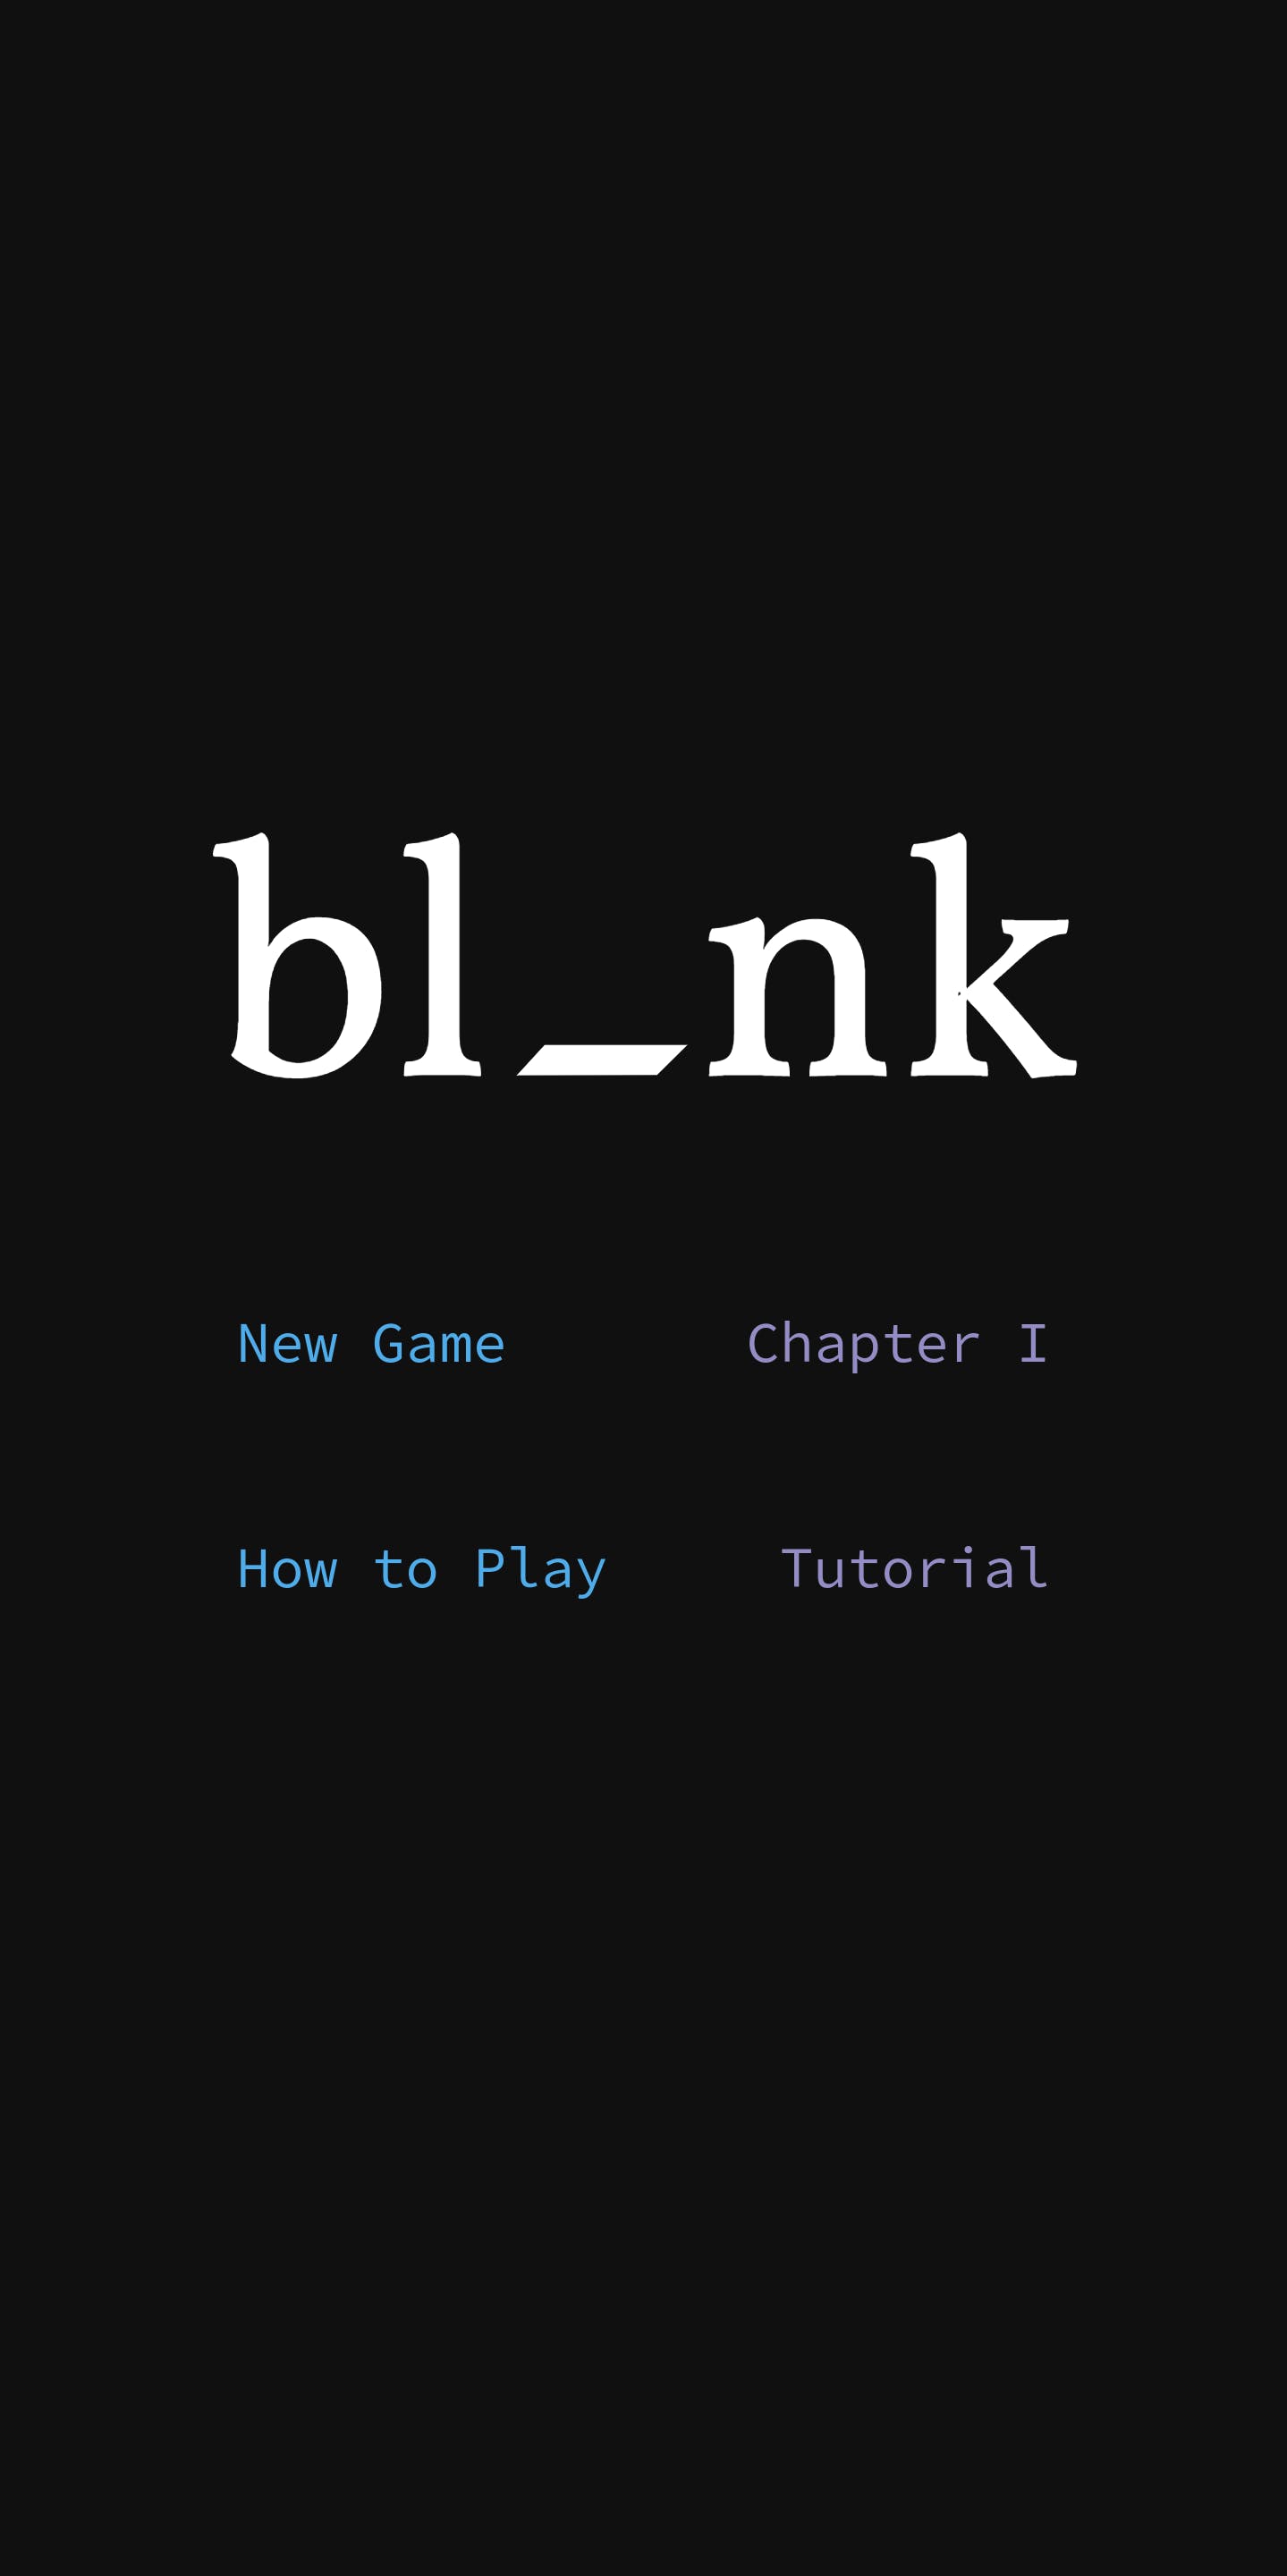 Blank - Room Escape Game media 1